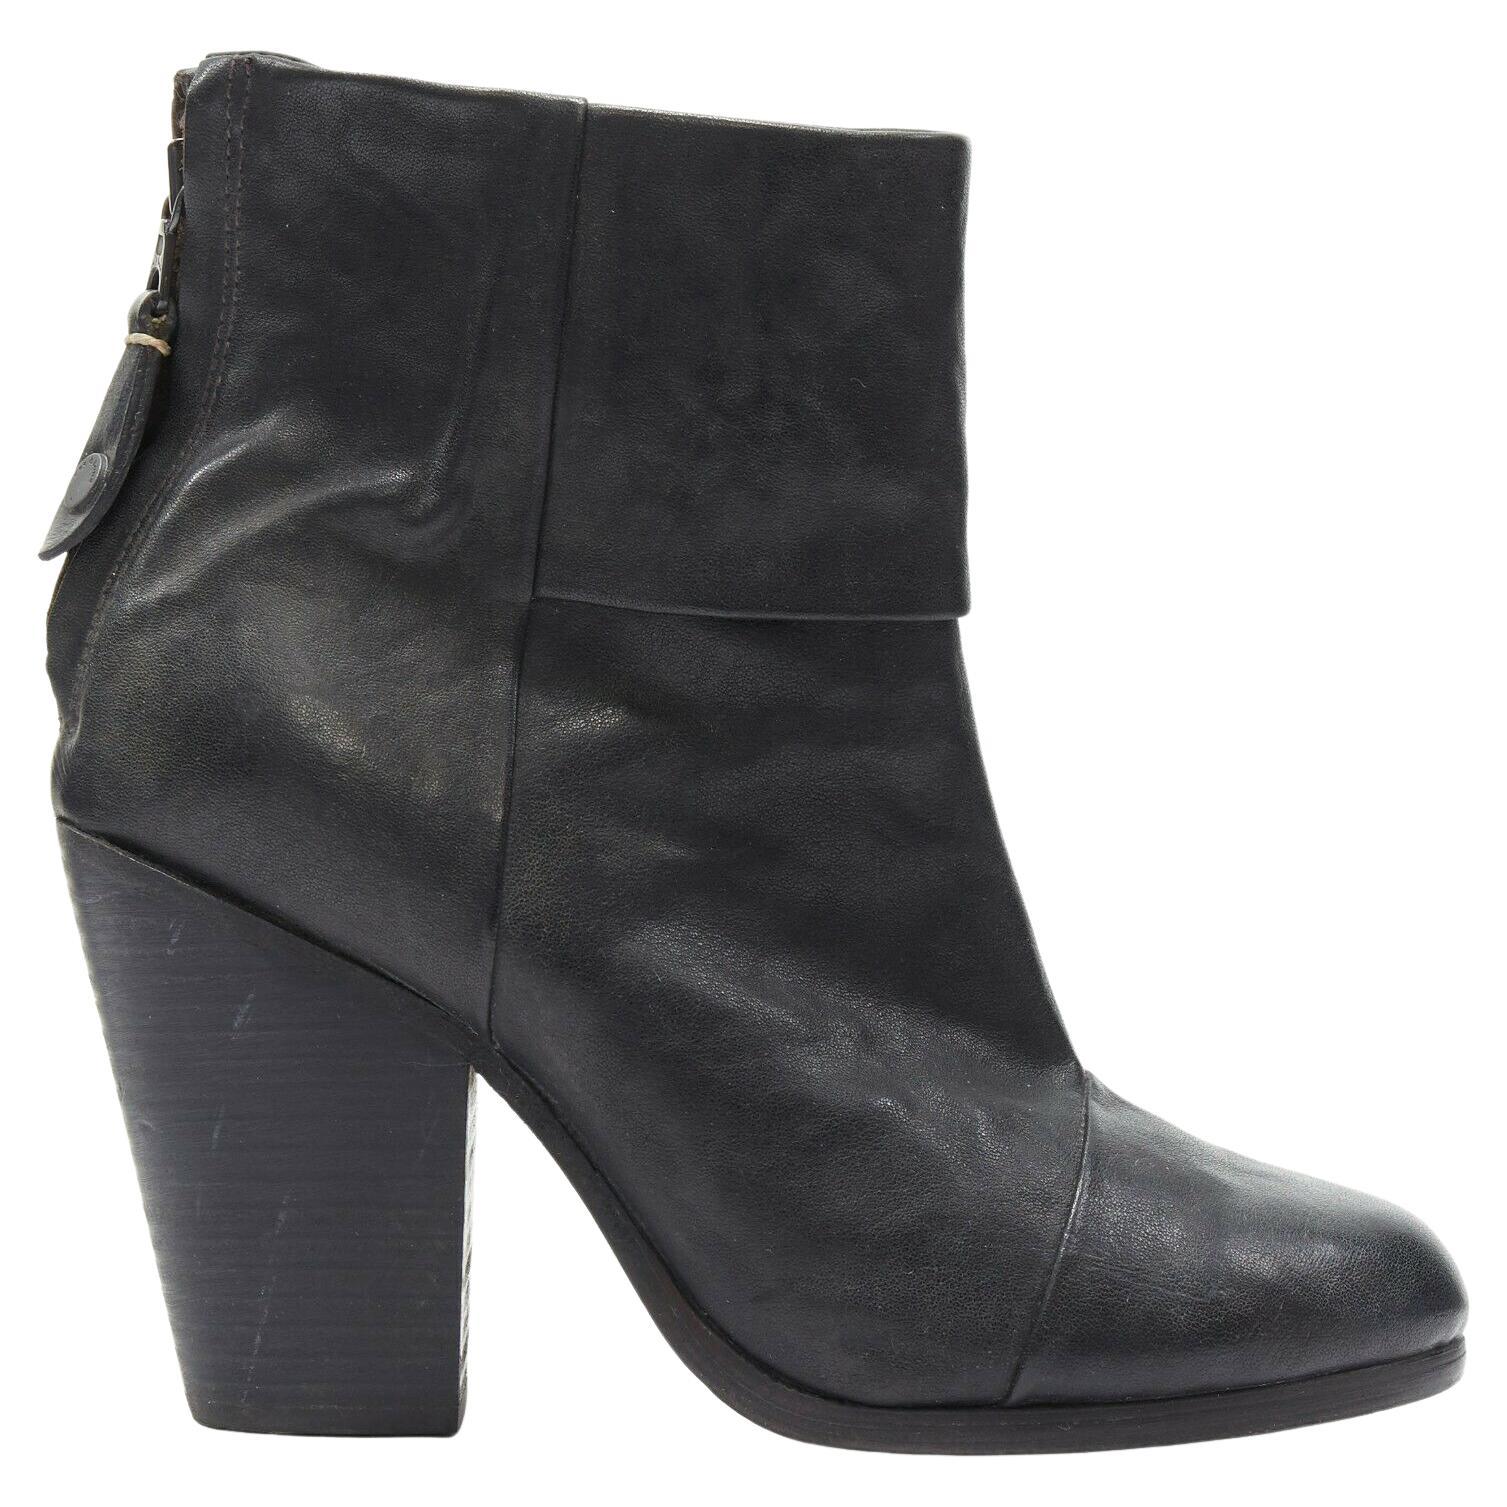 RAG BONE black leather round toe chunky stacked heel western ankle boot EU36 For Sale